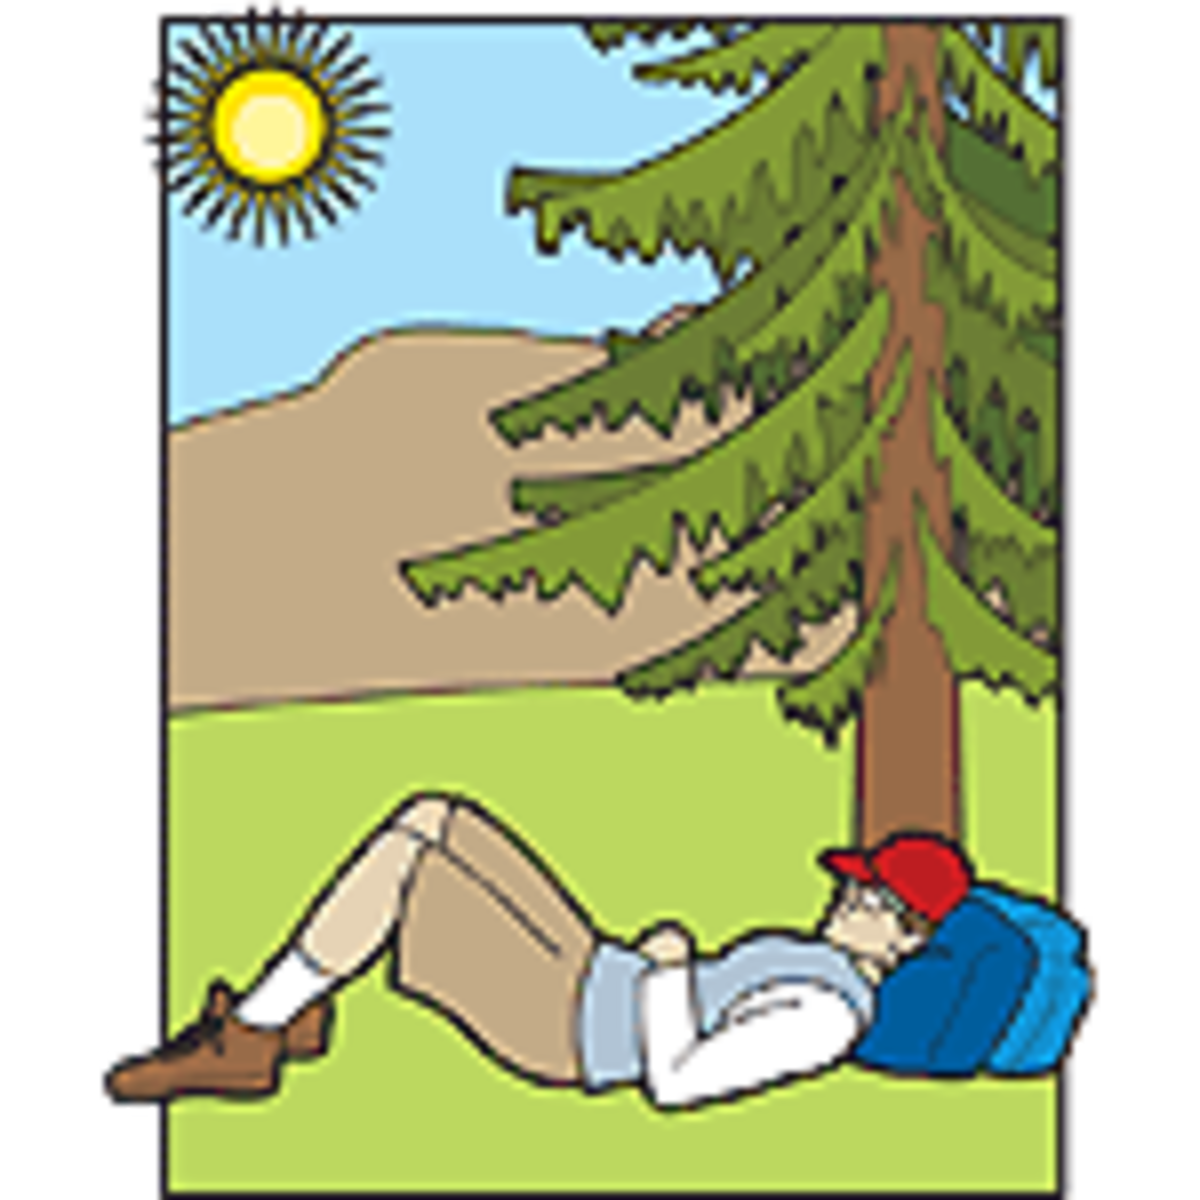 hiking clipart lost hiker